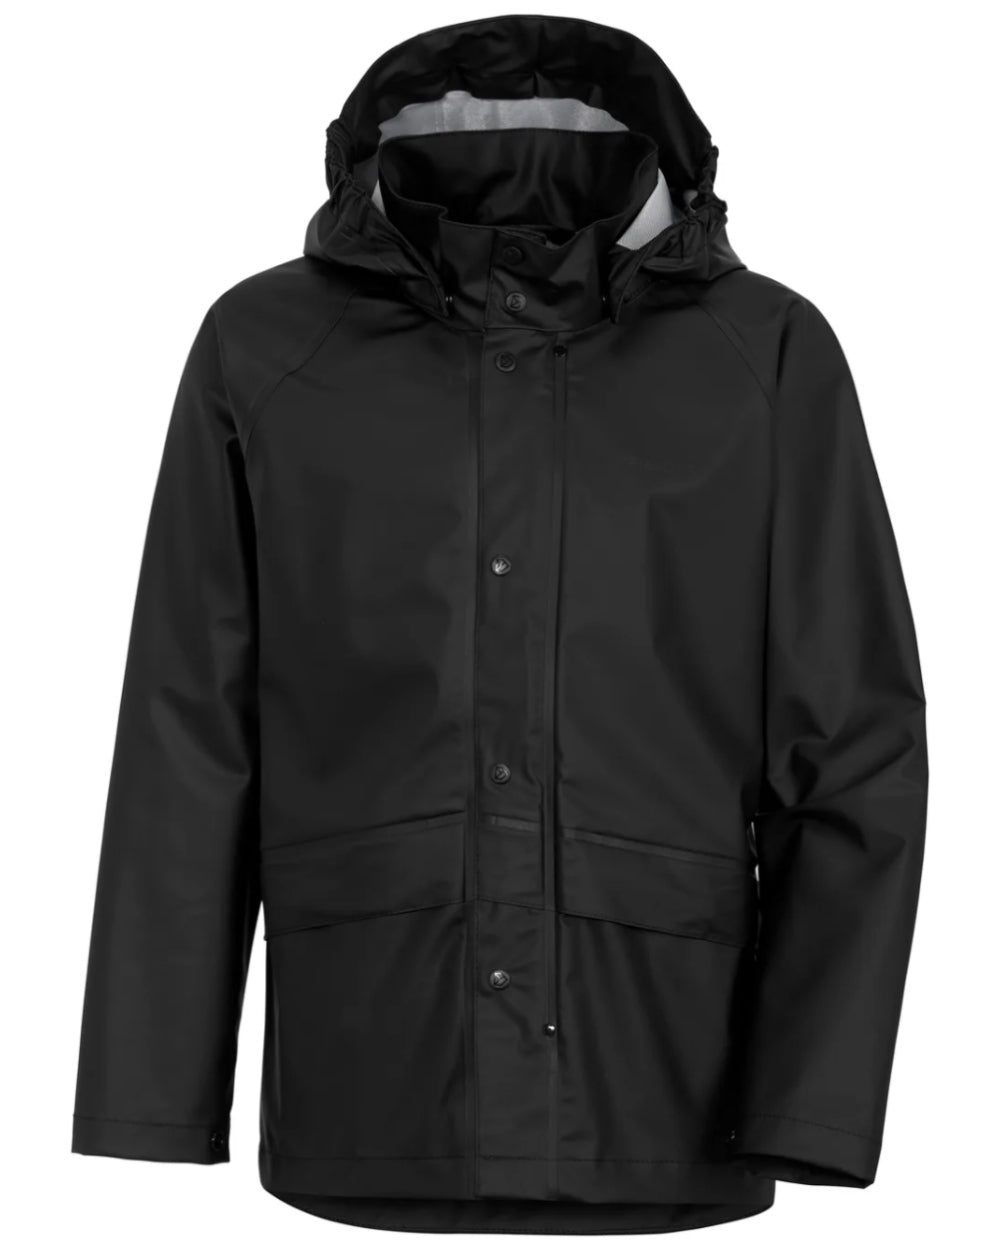 Black Coloured Didriksons Avon Youth Jacket Galon On A White Background 